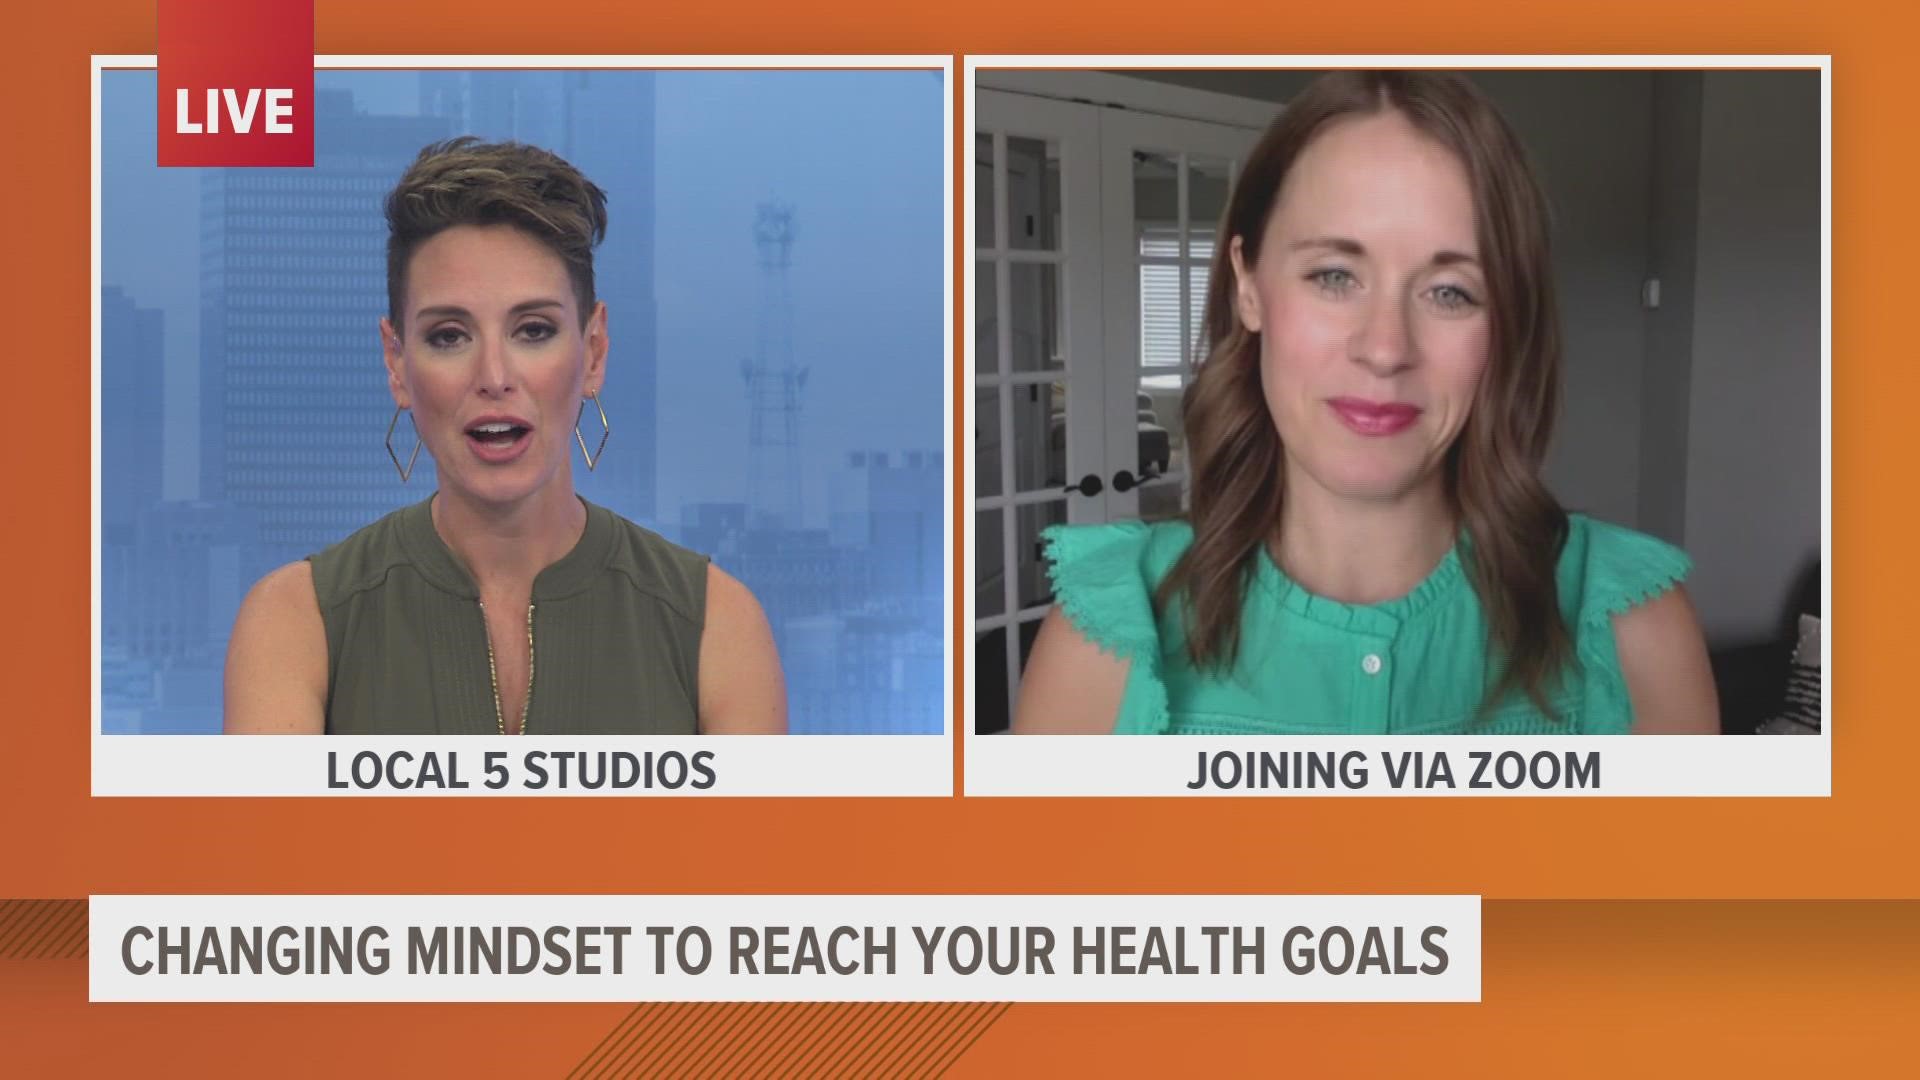 Kara Swanson with Life Well Lived shares tips to help you give yourself some grace while still making progress on your health journey.